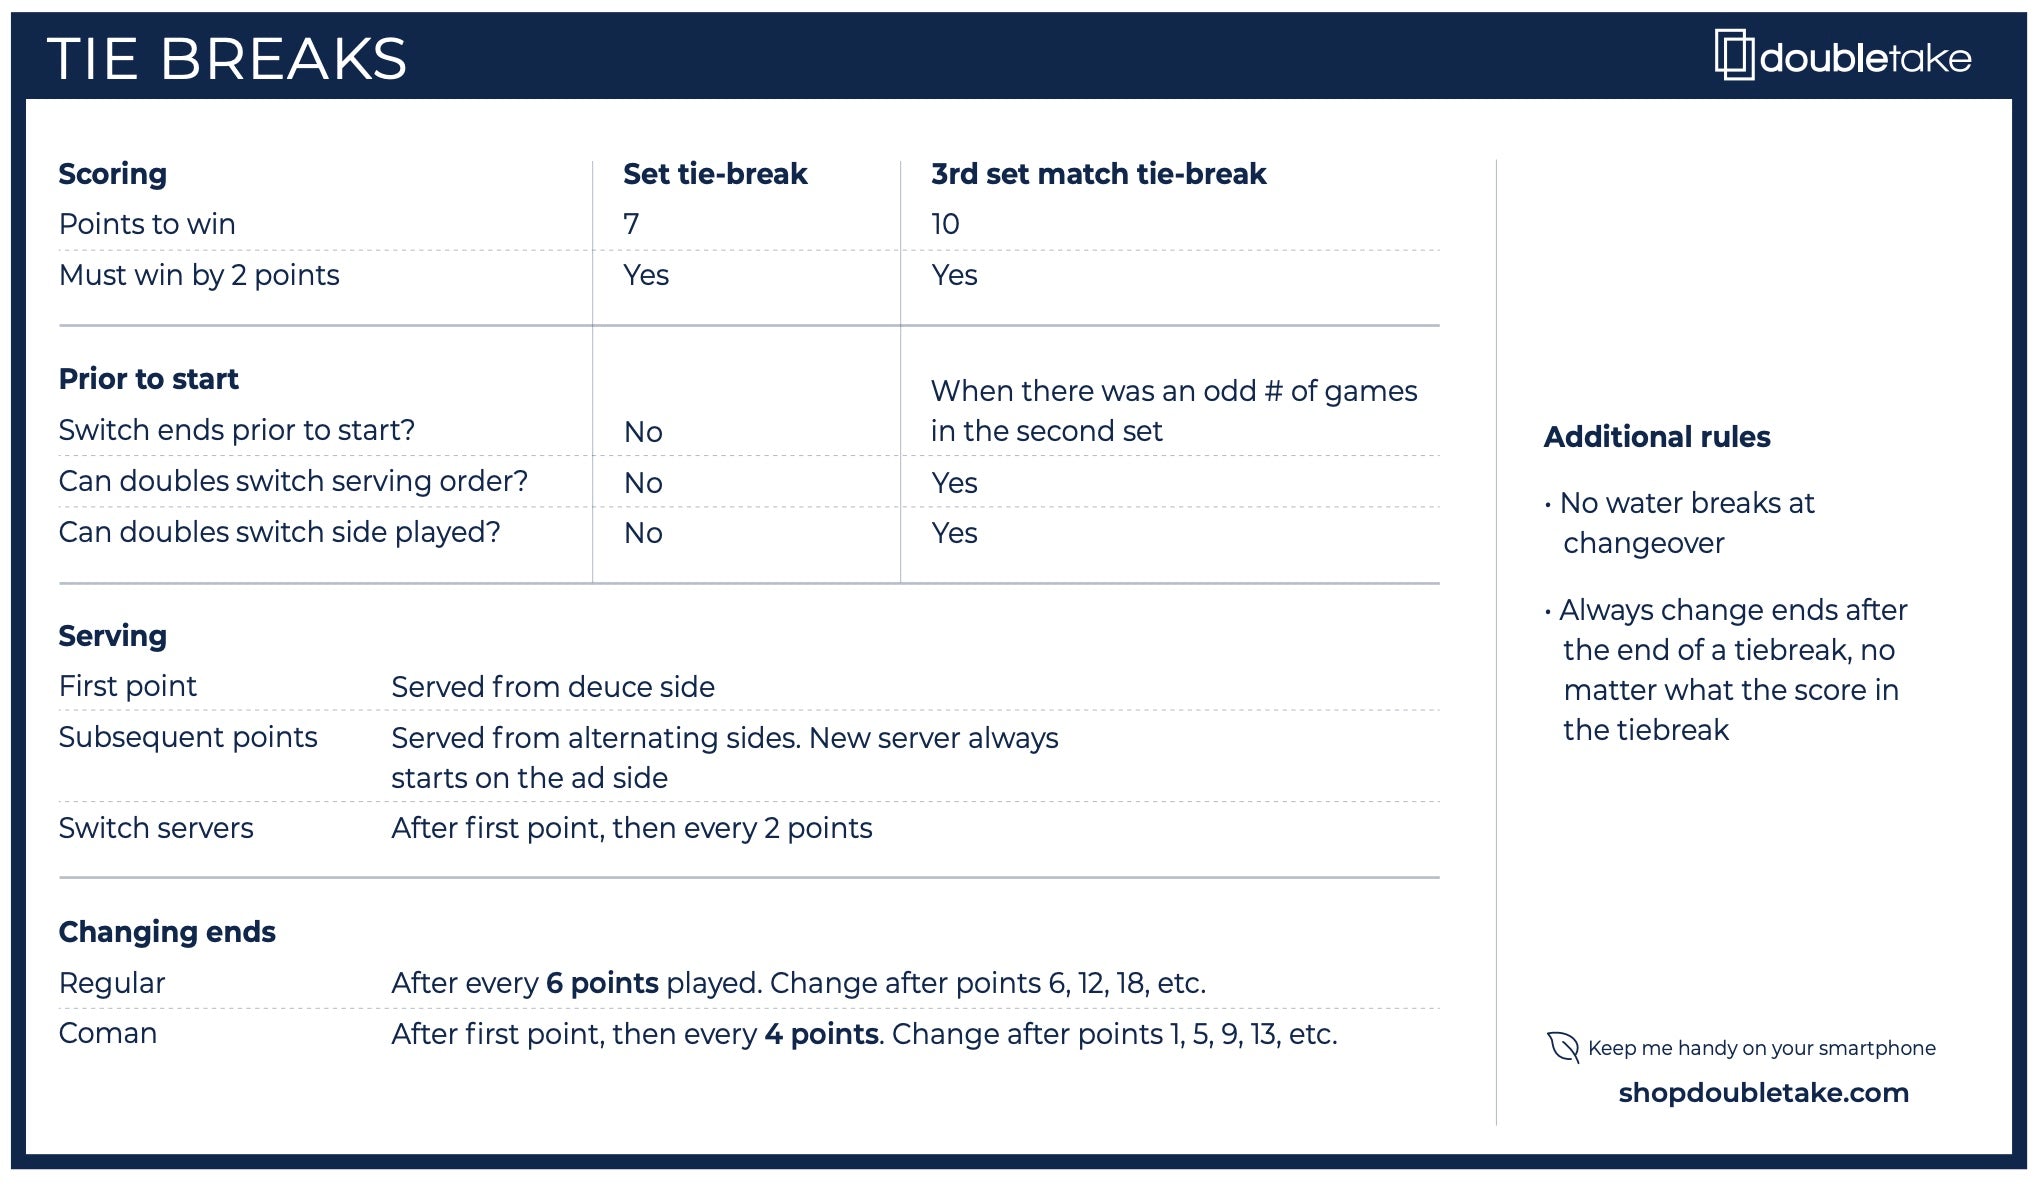 Tennis final set tie-break rules explained: Why changes were made